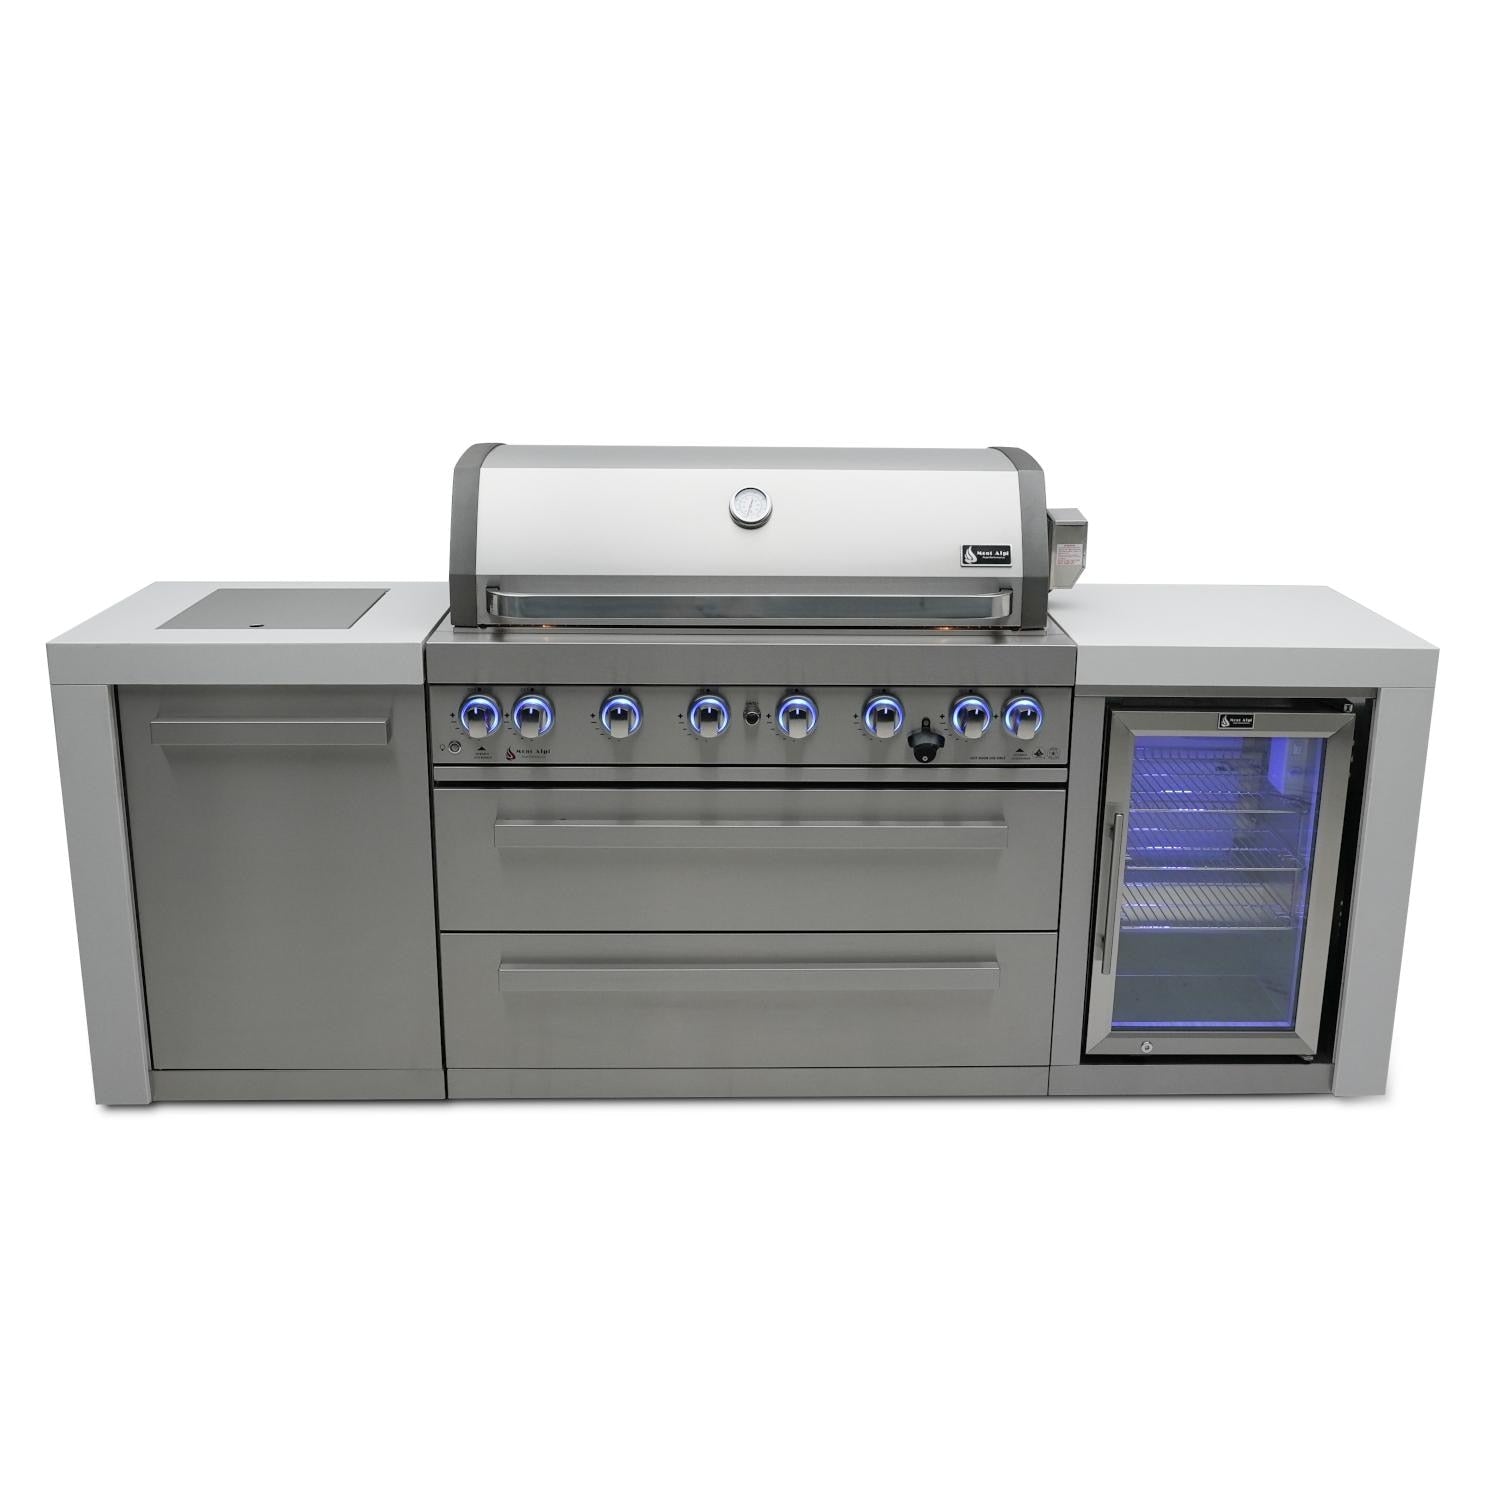 Mont Alpi 805 Deluxe Island Grill with Fridge Cabinet, MAi805-DFC